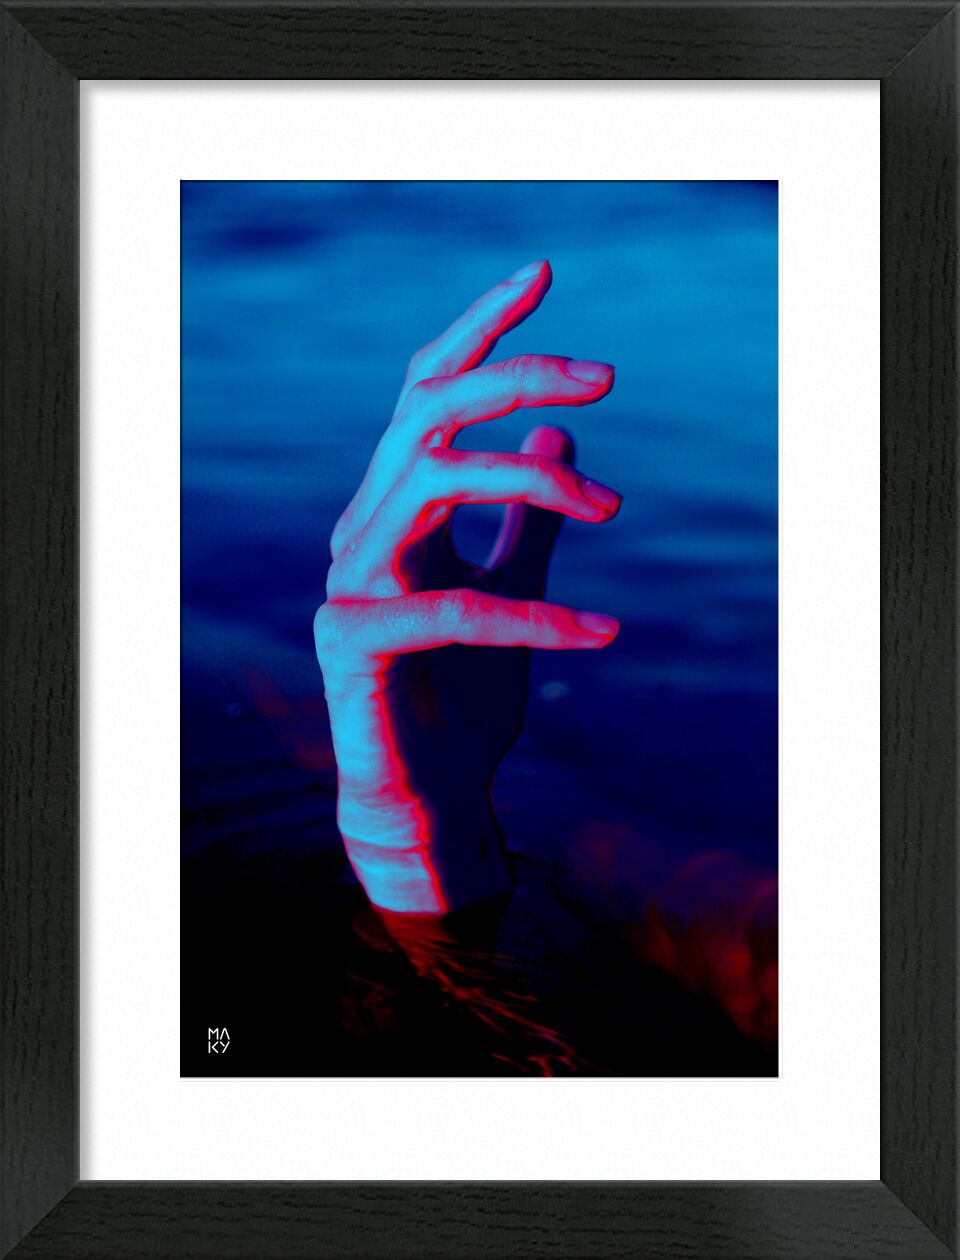 Touch from Maky Art, Prodi Art, hand, water, photography